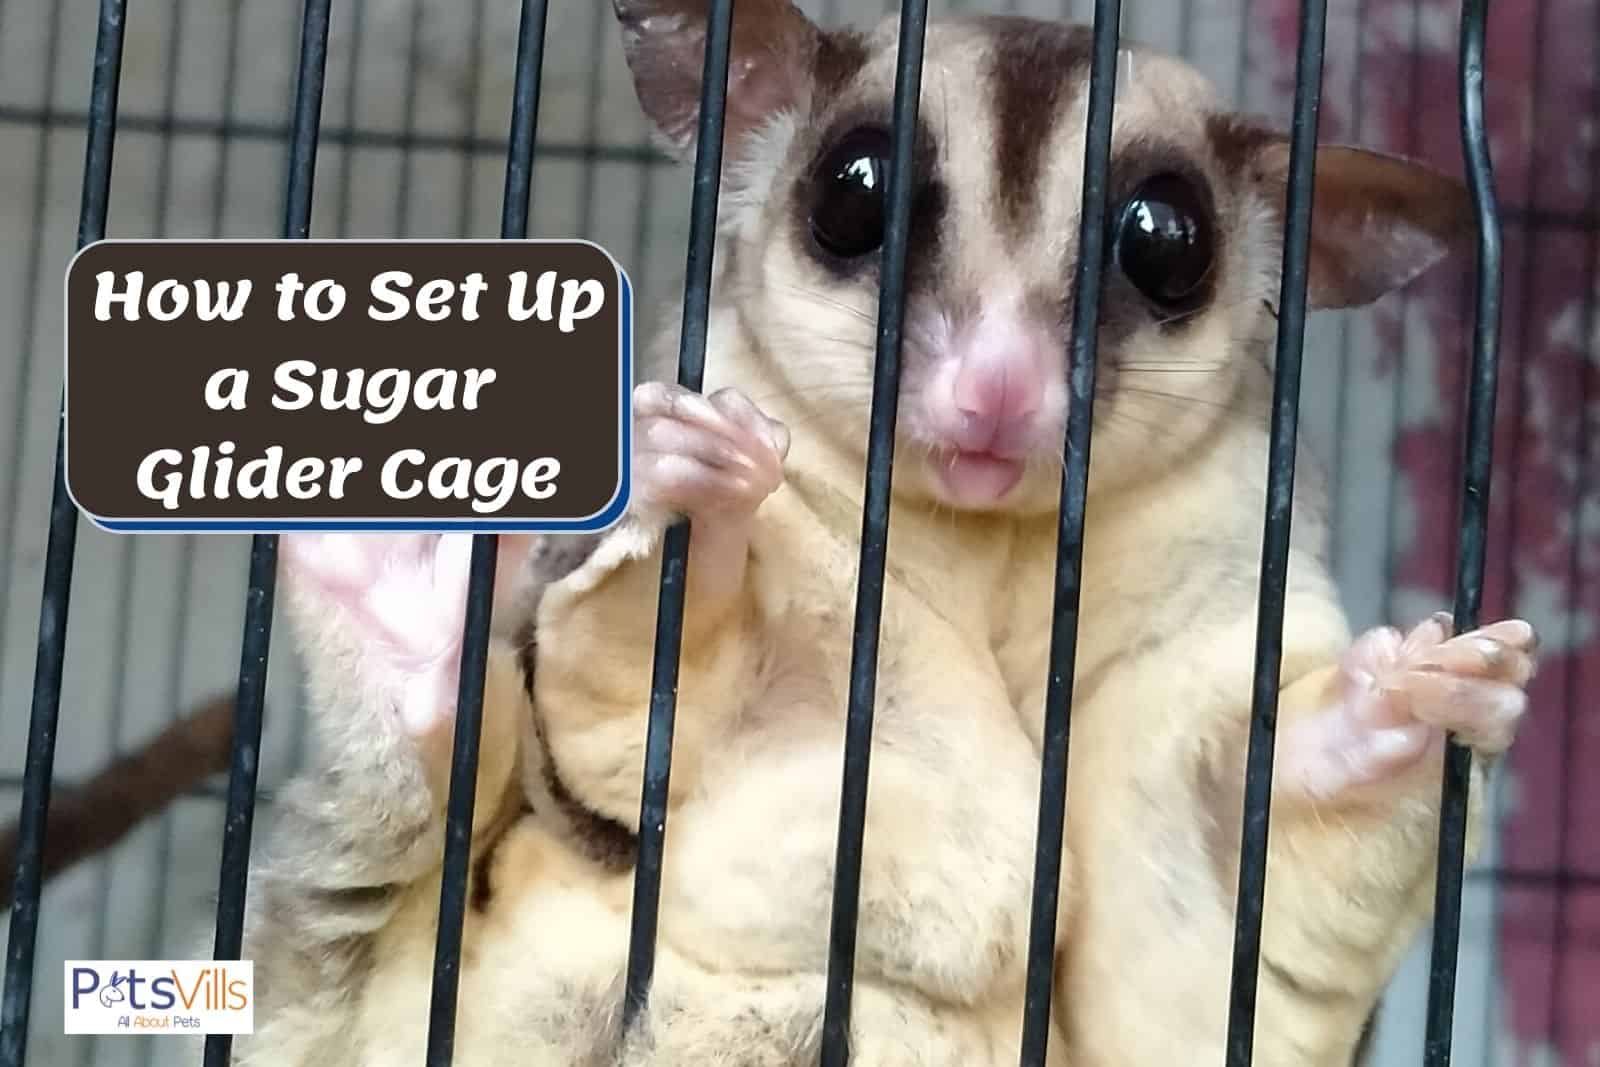 sugar glider on his cage so how to set up a sugar glider cage?